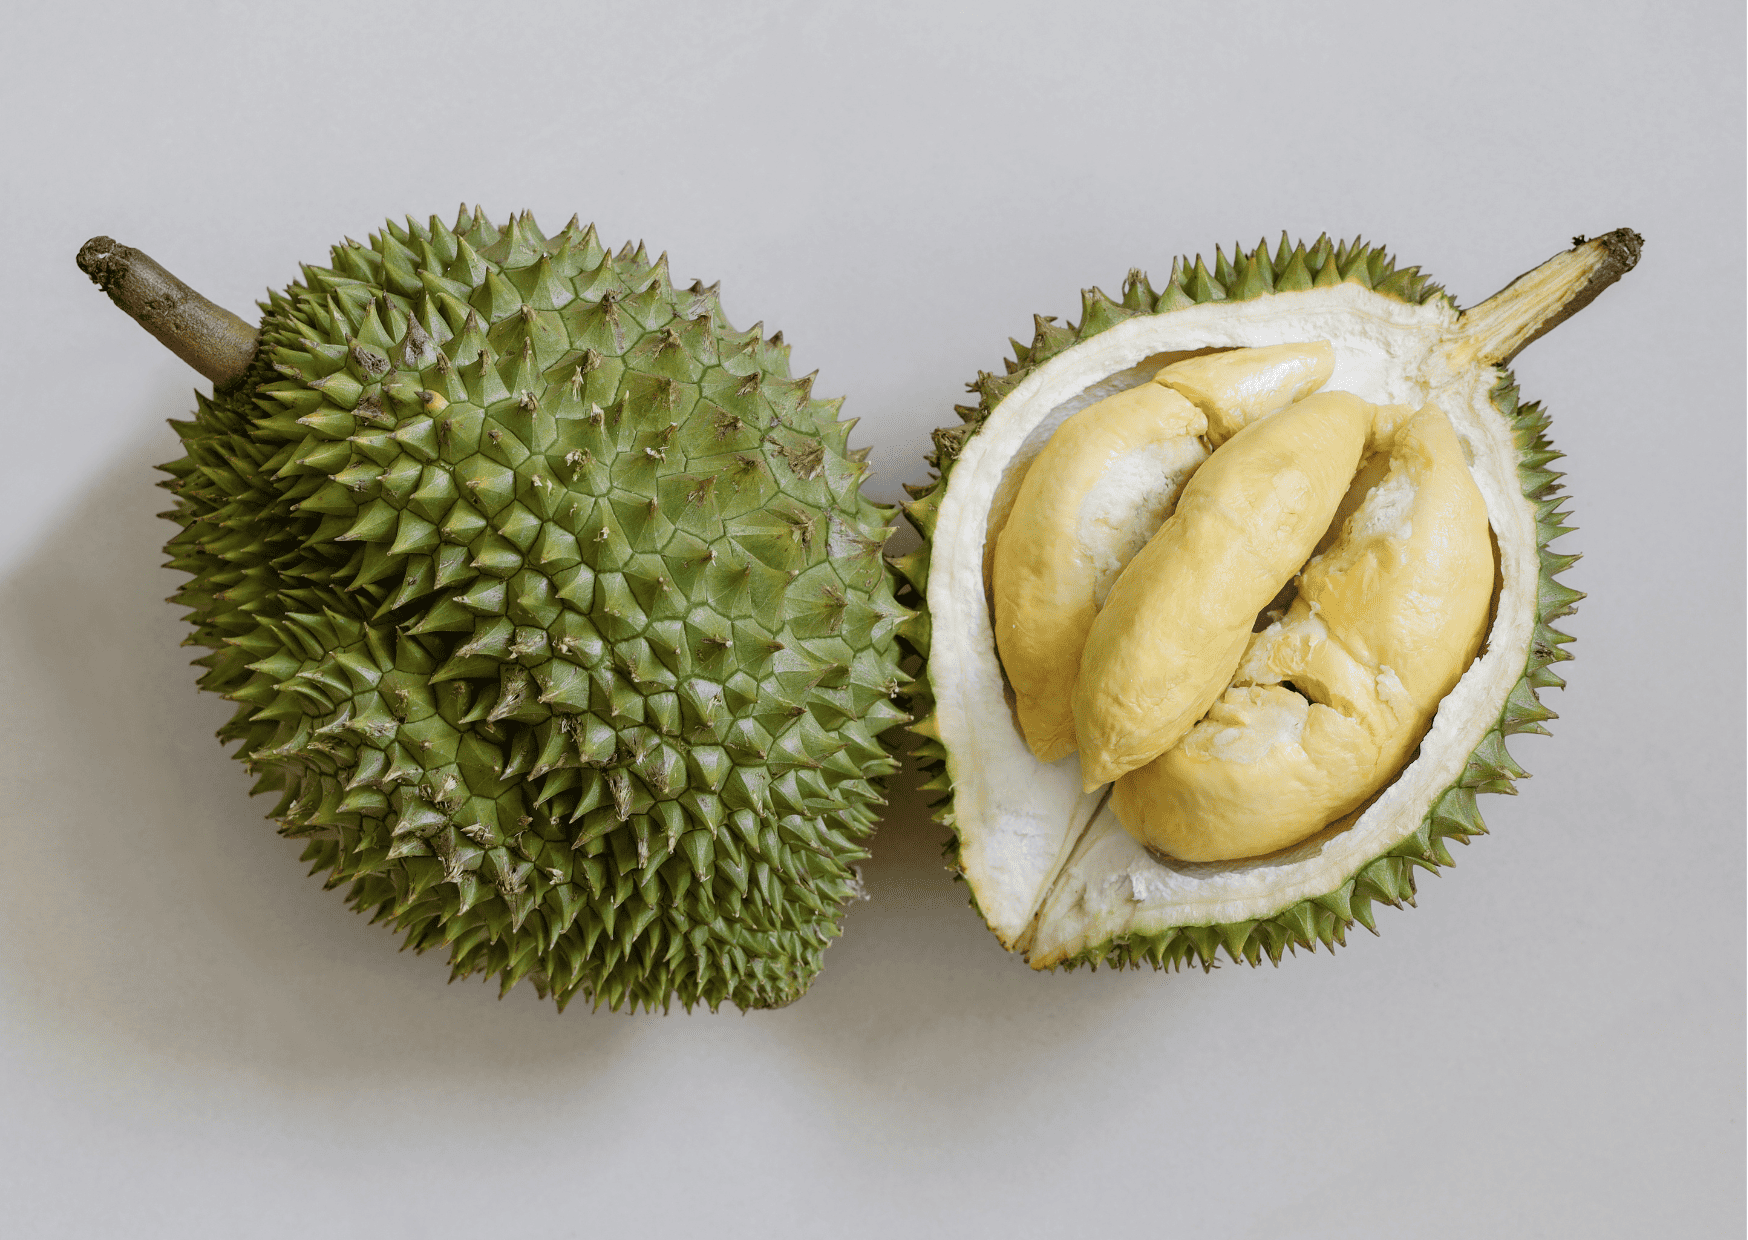 Fruits in Singapore: 25 Tropical Singapore Fruits to Try and Singapore Desserts